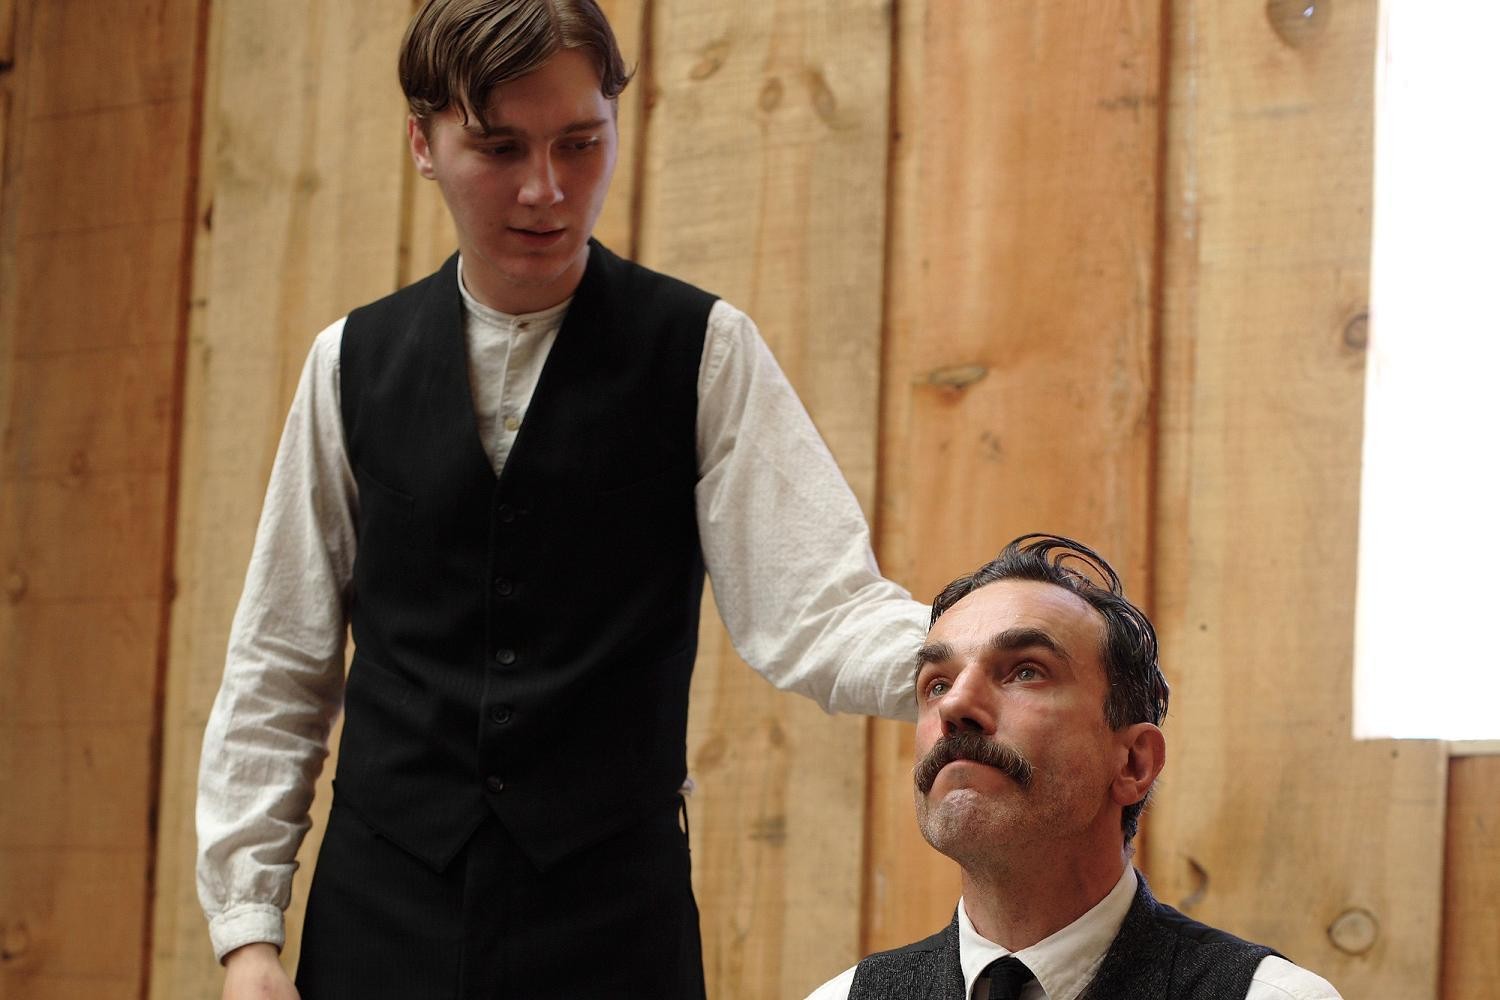 Sir Daniel Day-Lewis and Paul Dano in 'There Will Be Blood'